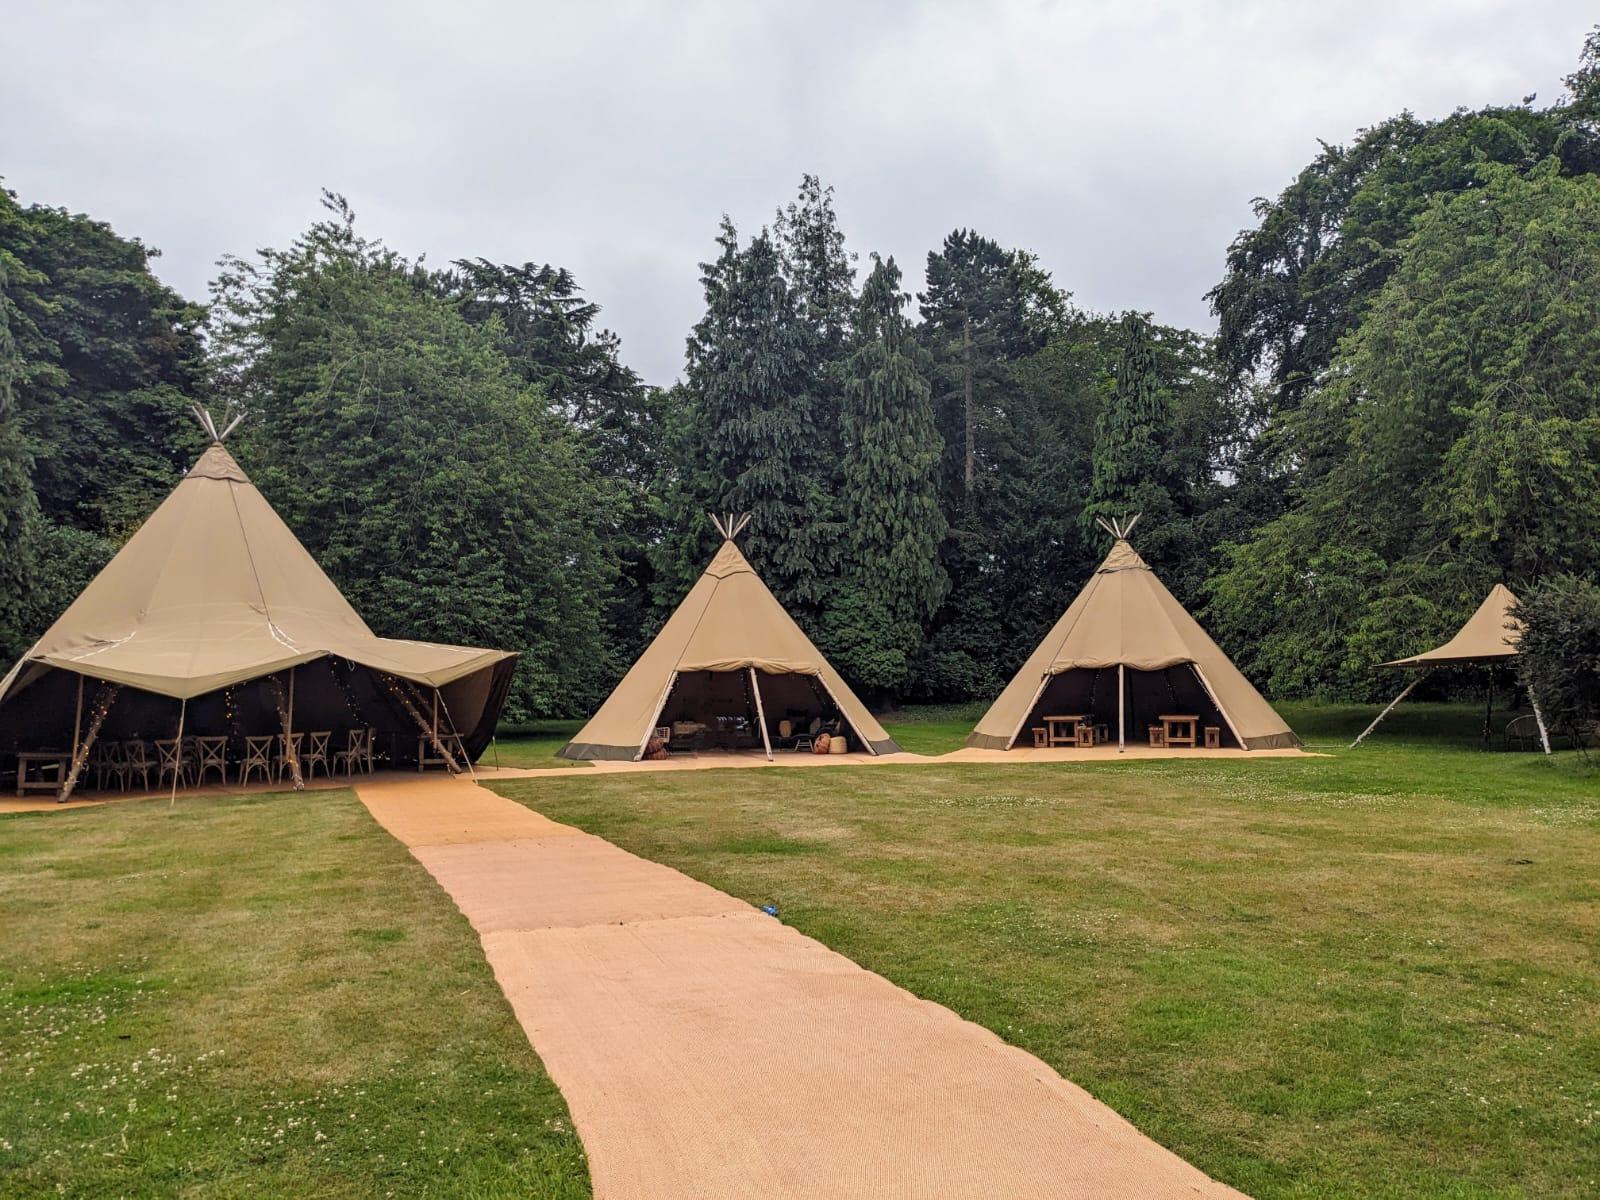 New Constellation teepees at the Homestead garden